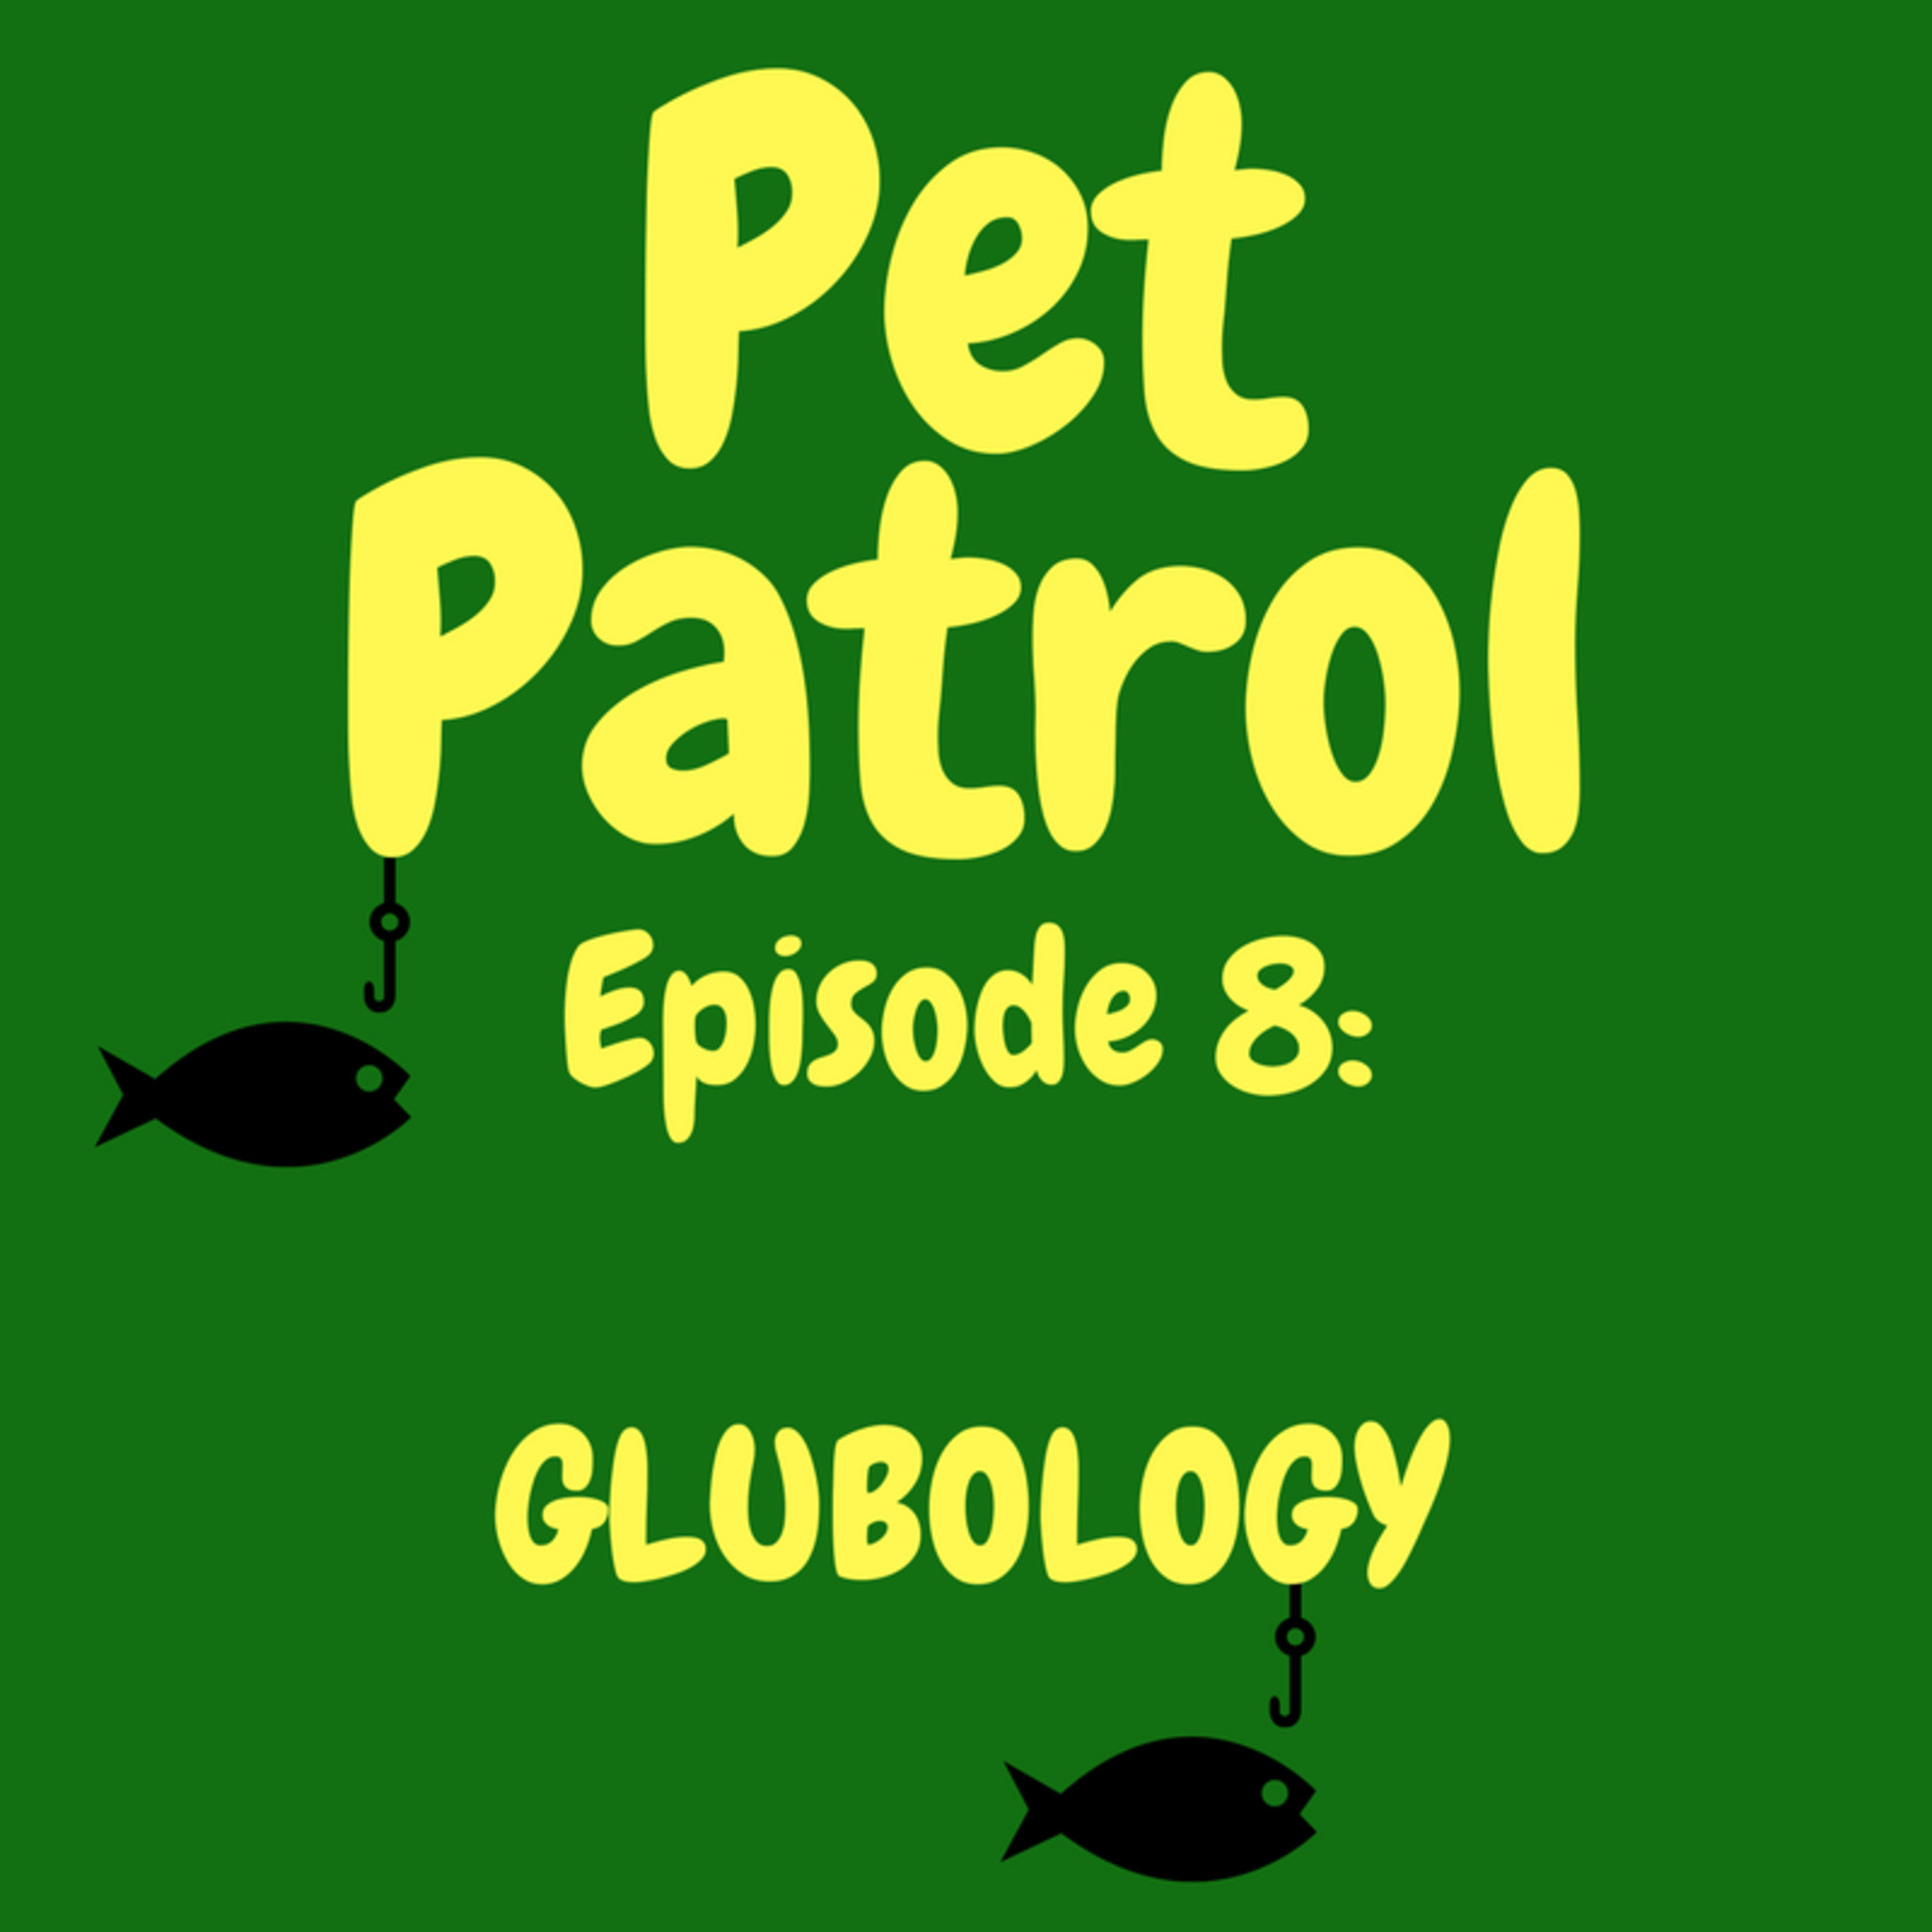 Glubology - Hypopetical: What fishy fellow would you befriend?